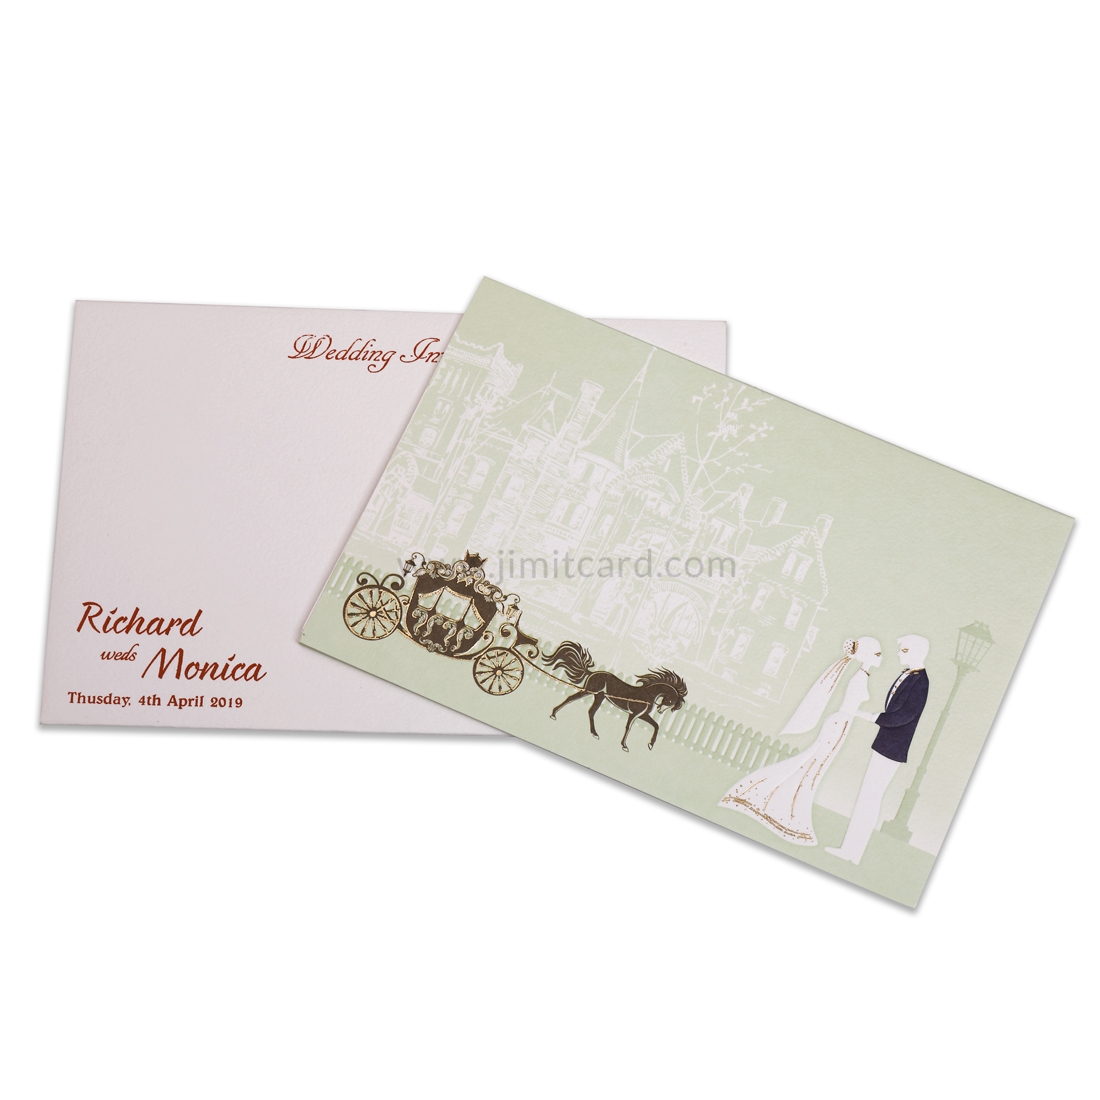 Catholic Wedding Card With Bride-Groom and Horse Cart-0